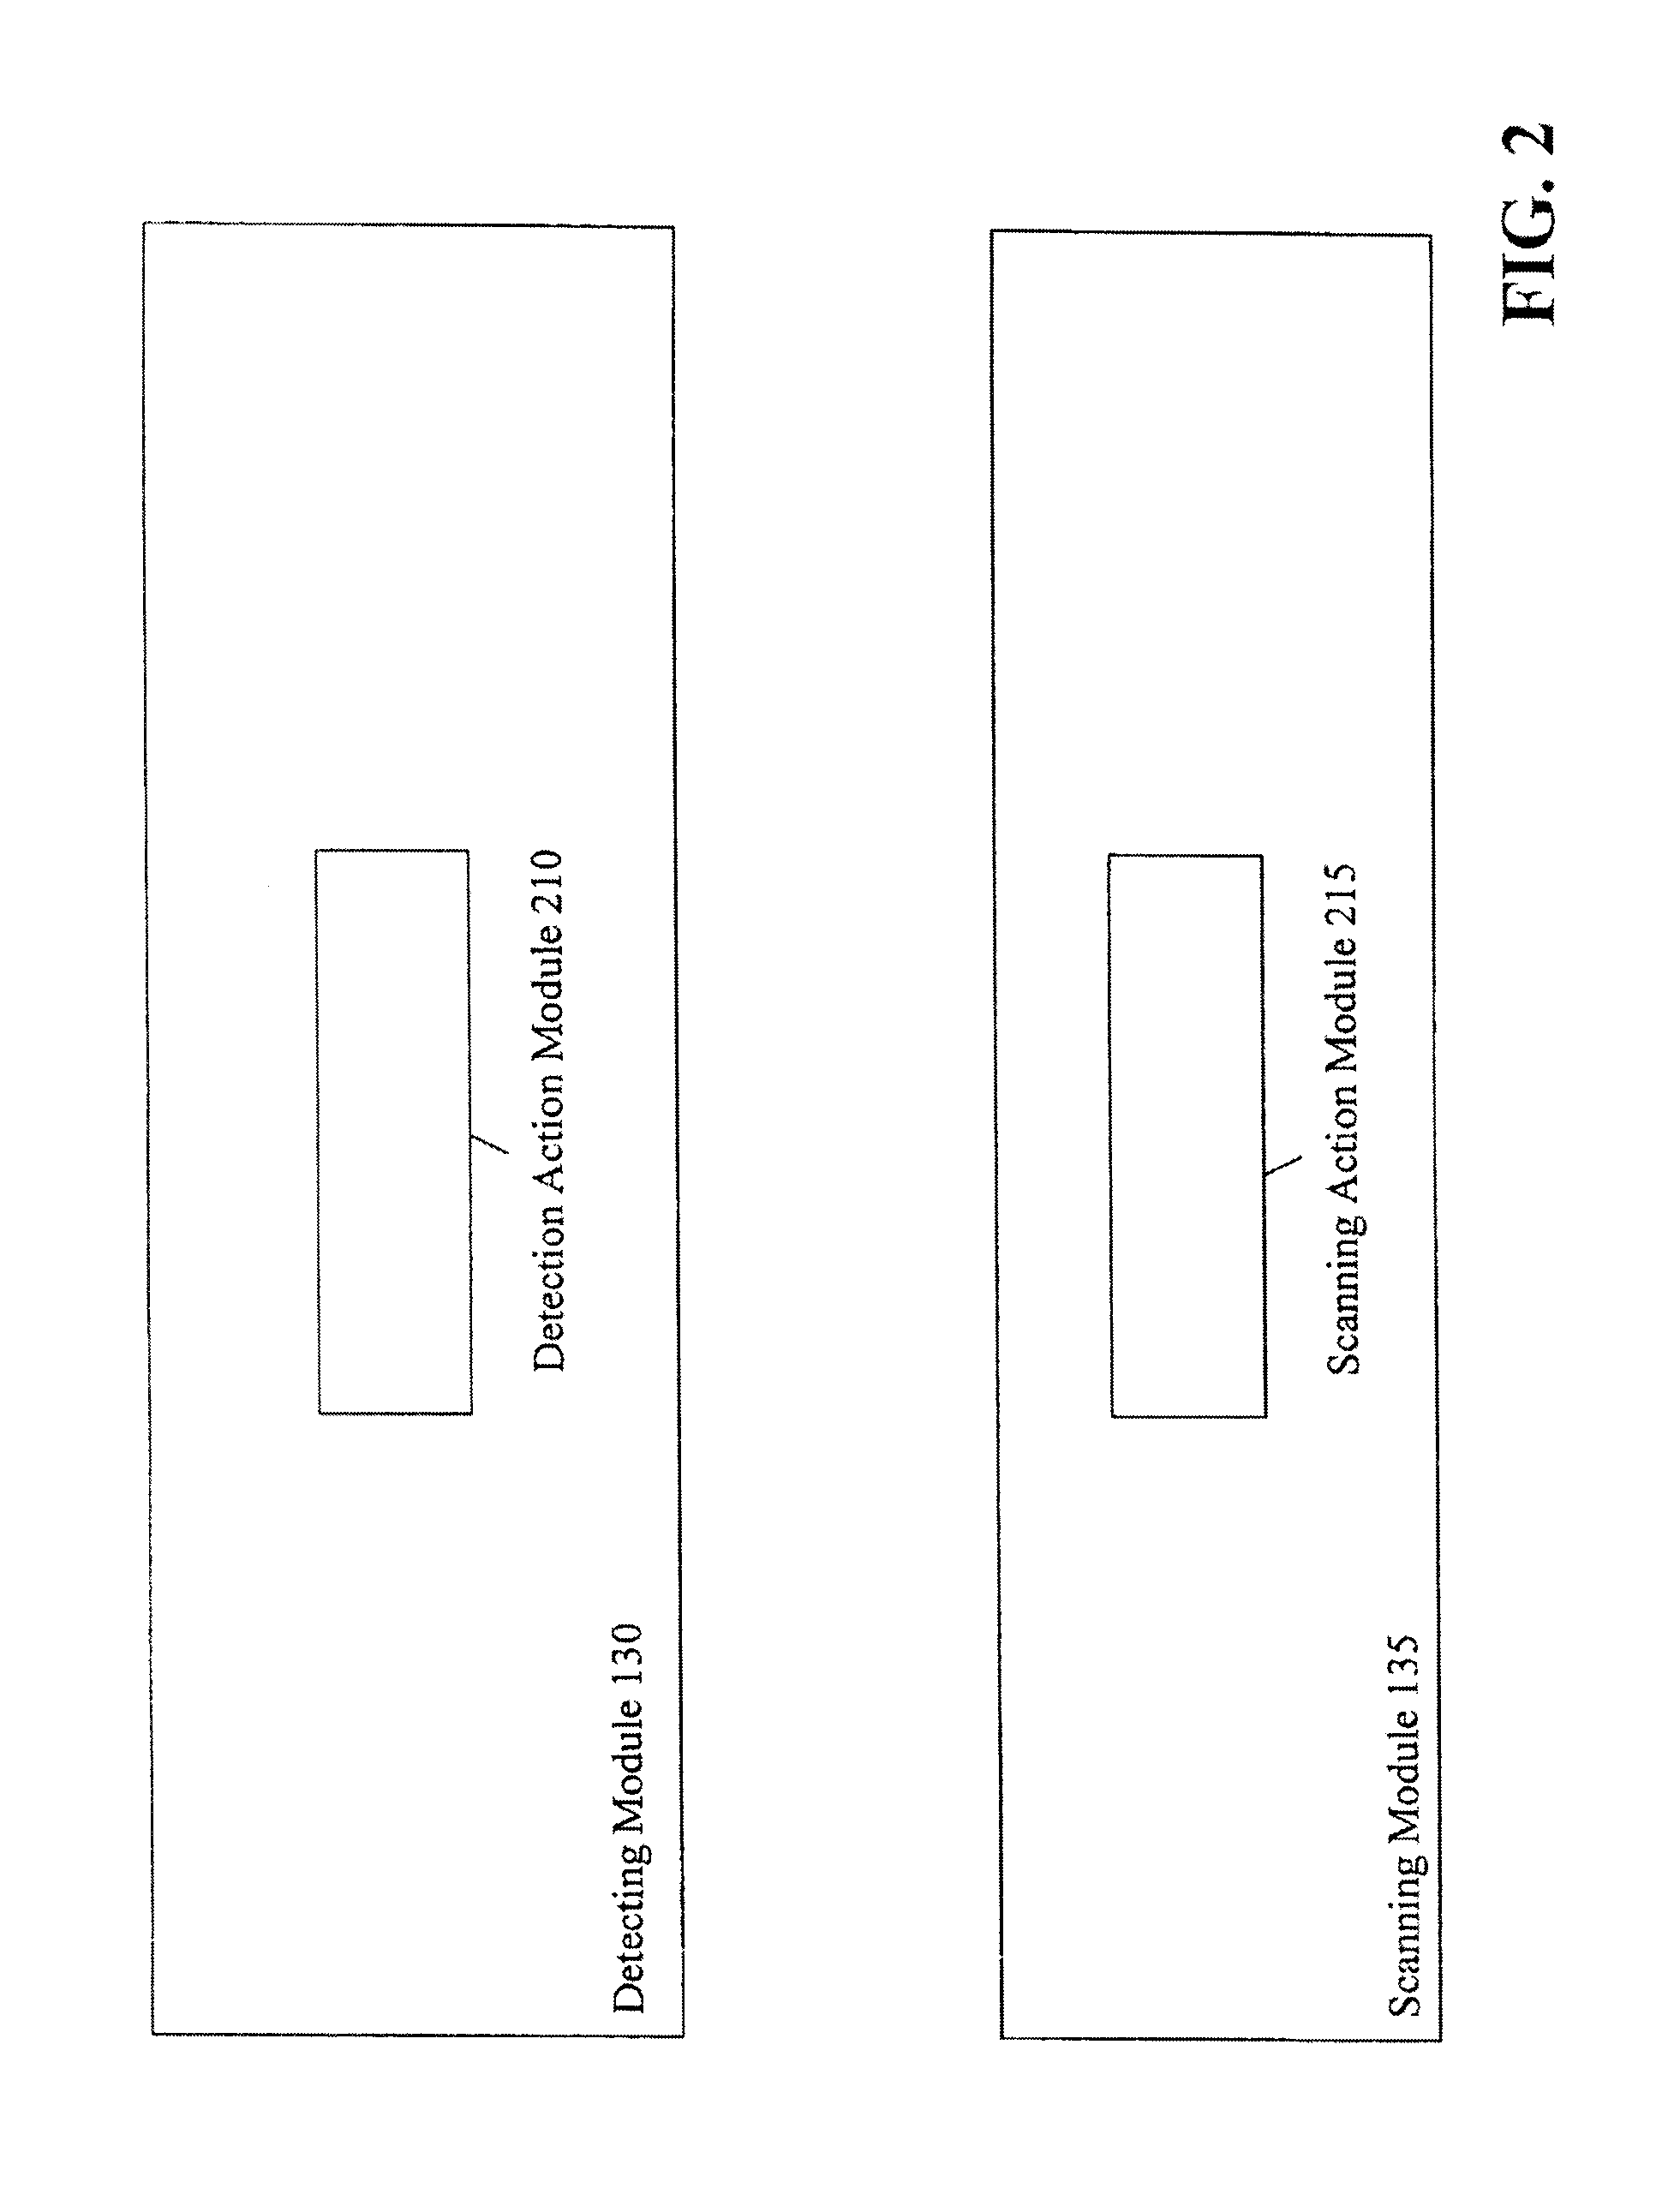 Method and system for scanning network devices